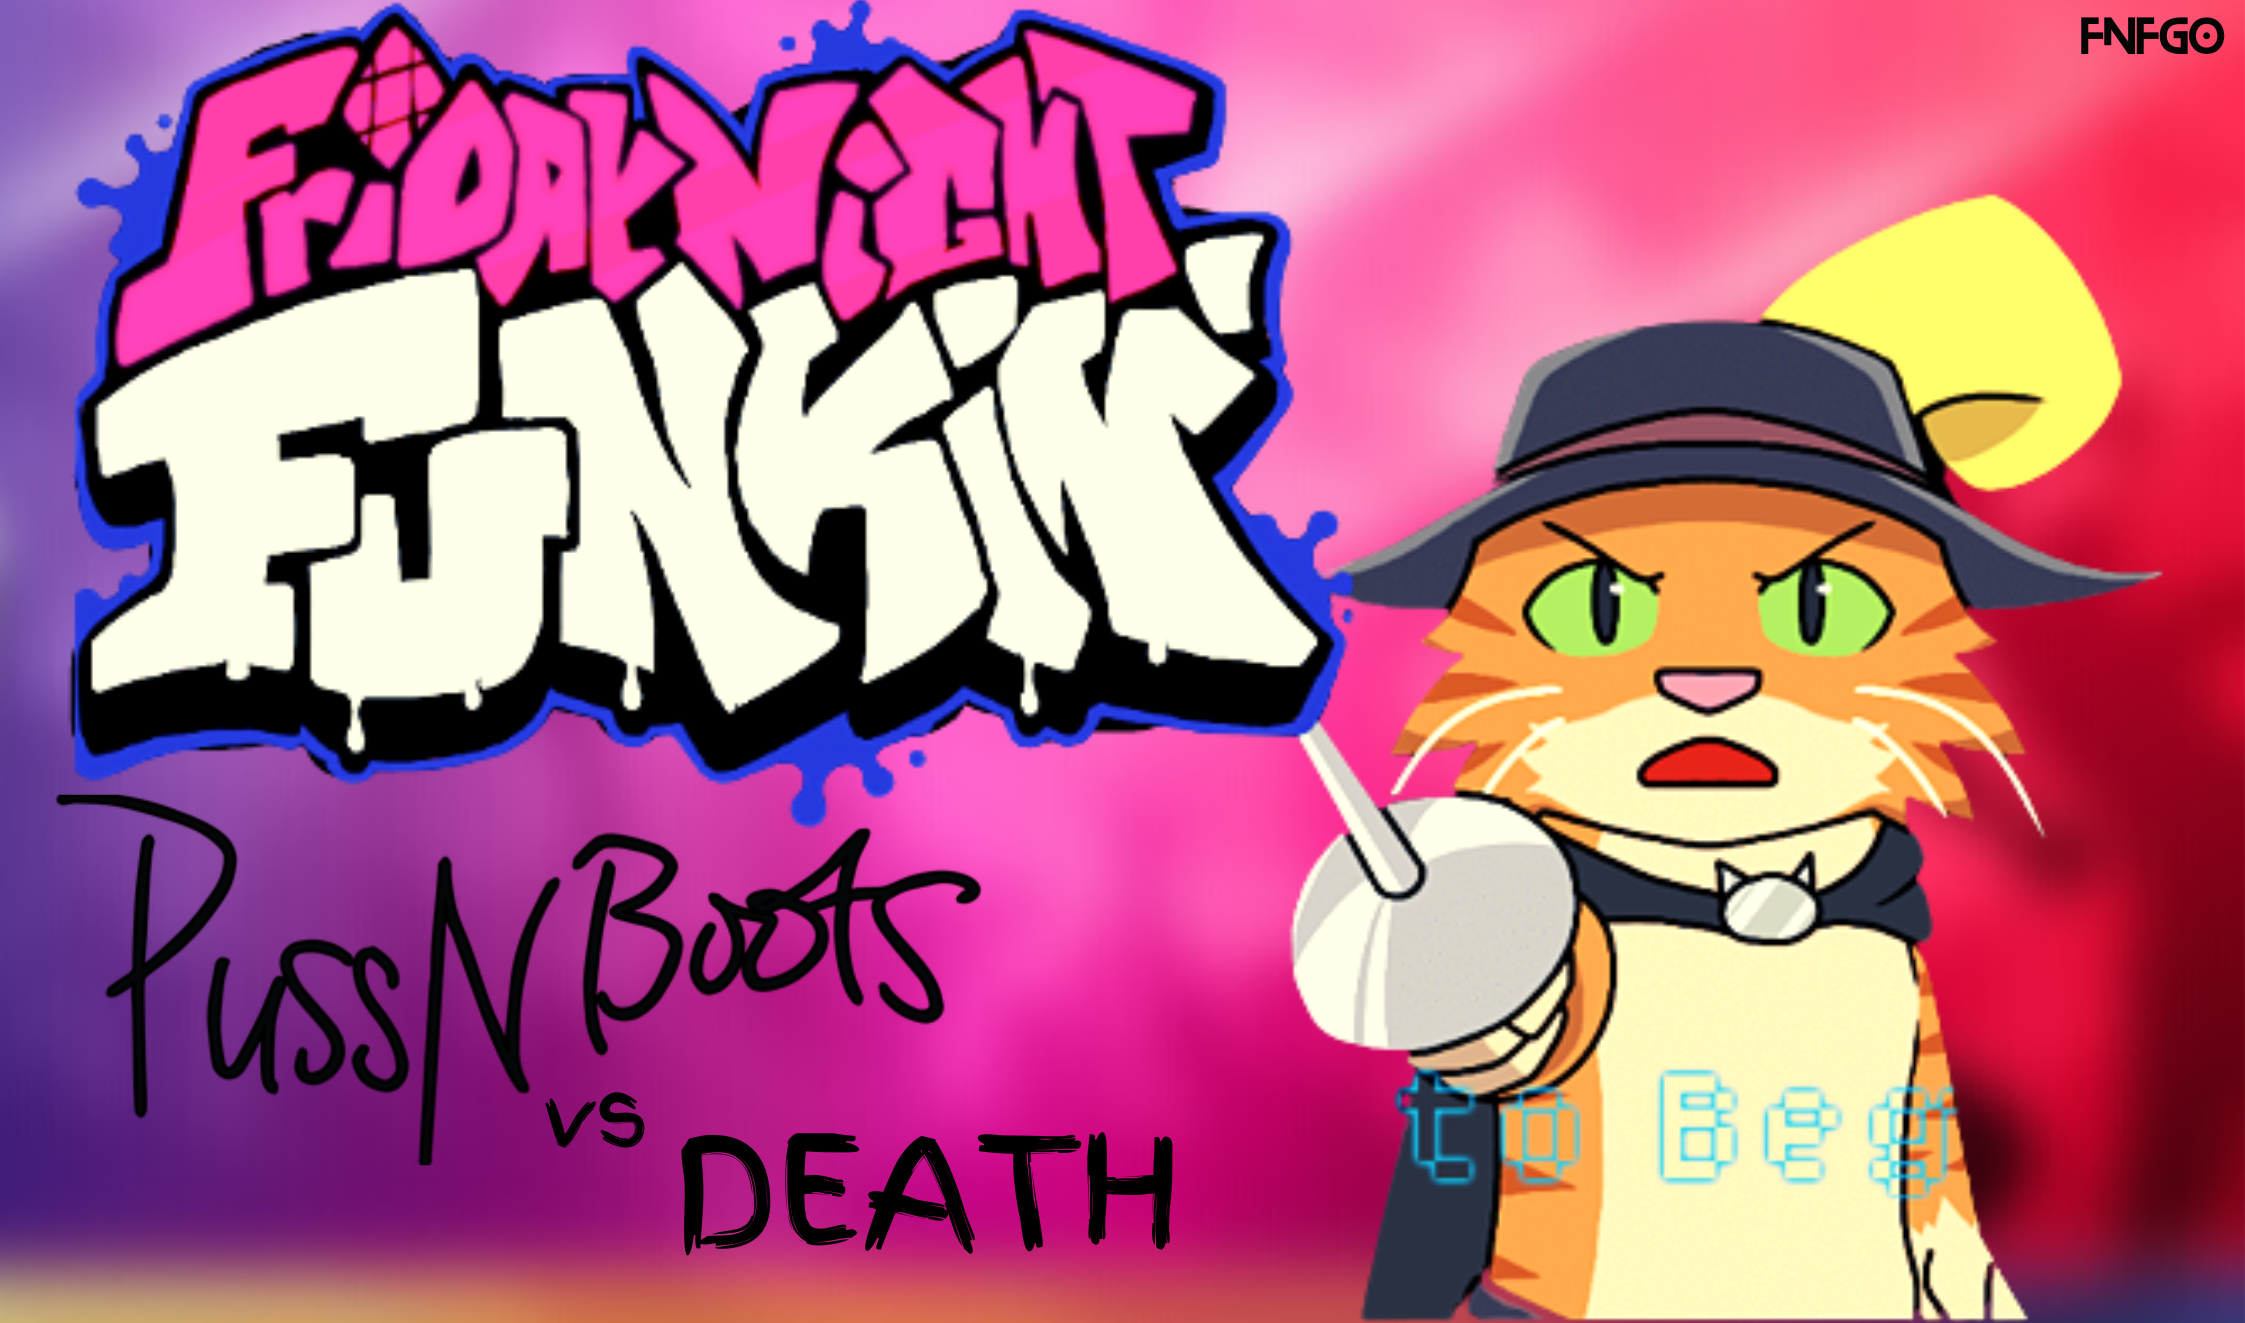 You just got toca boca'd! 1/2 by ThePinkCatSwag on Newgrounds